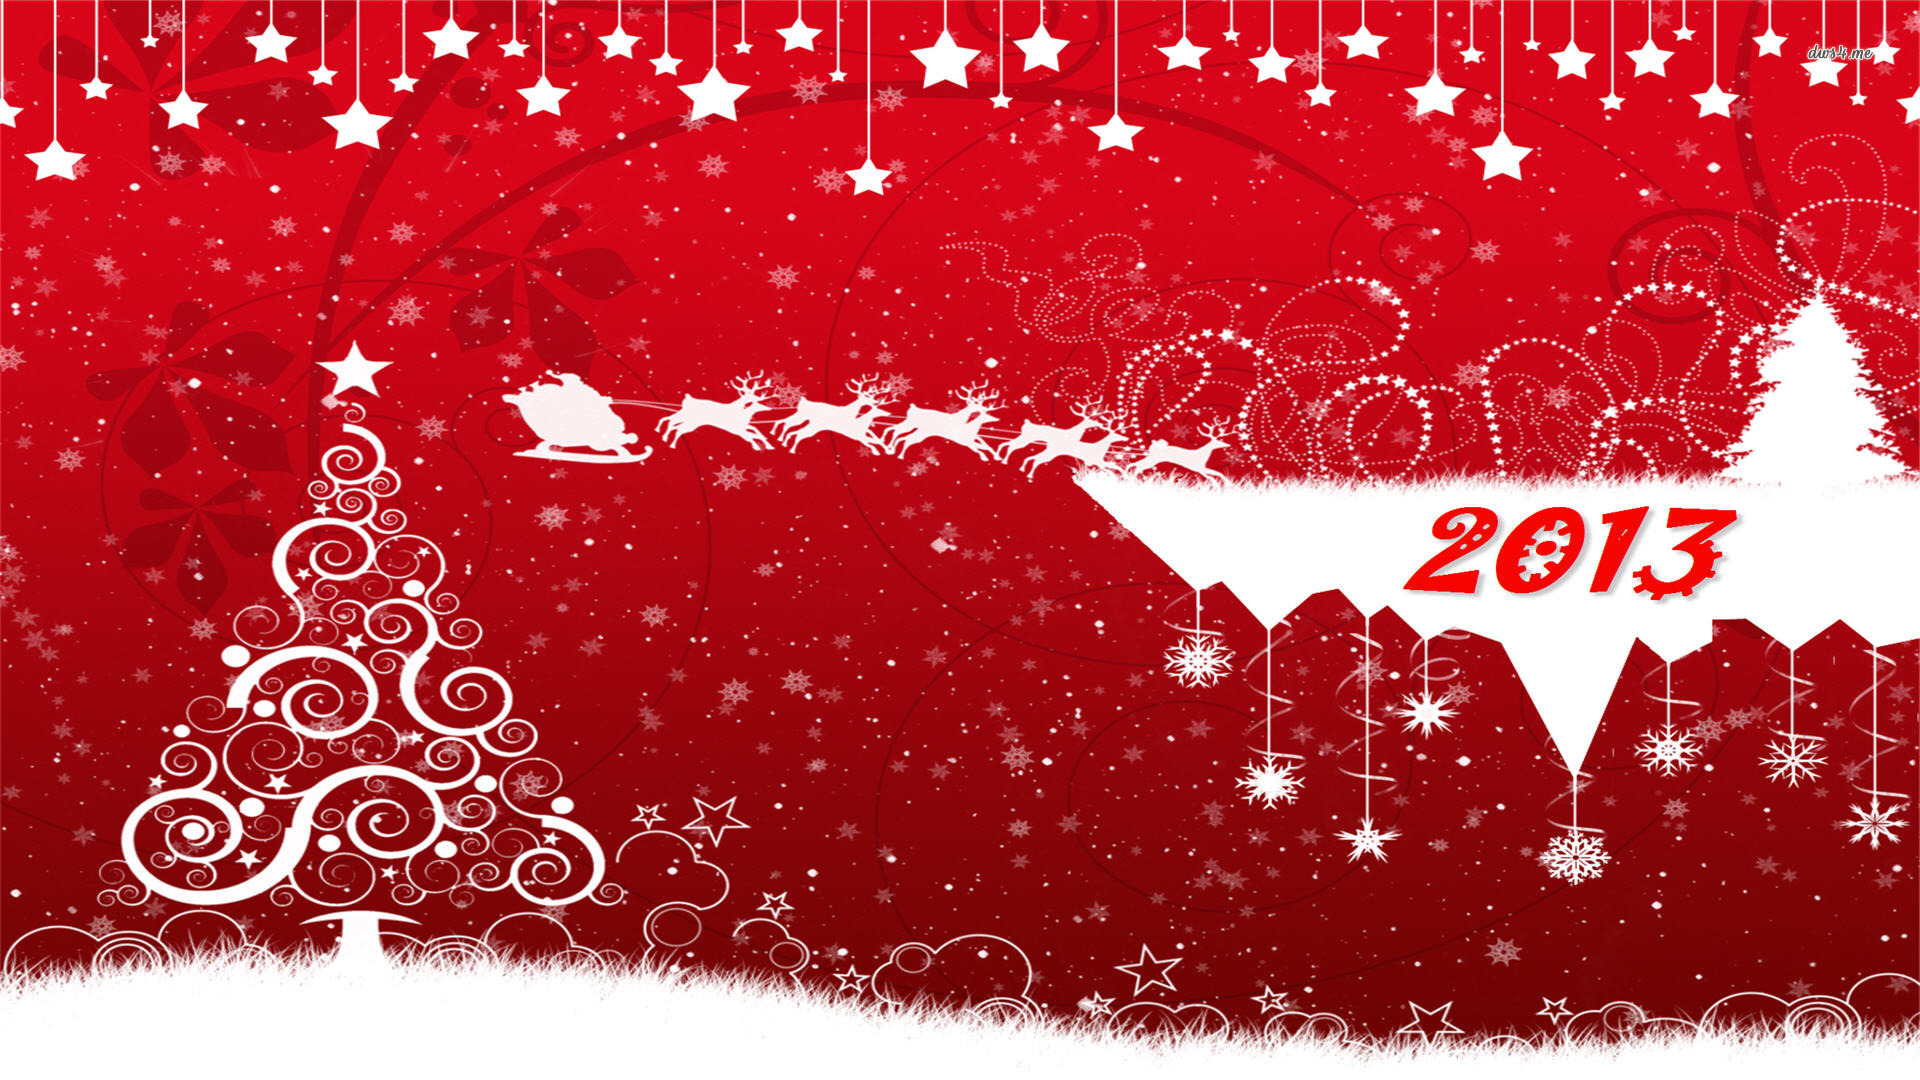 Christmas Wallpaper Red And White - HD Wallpaper 